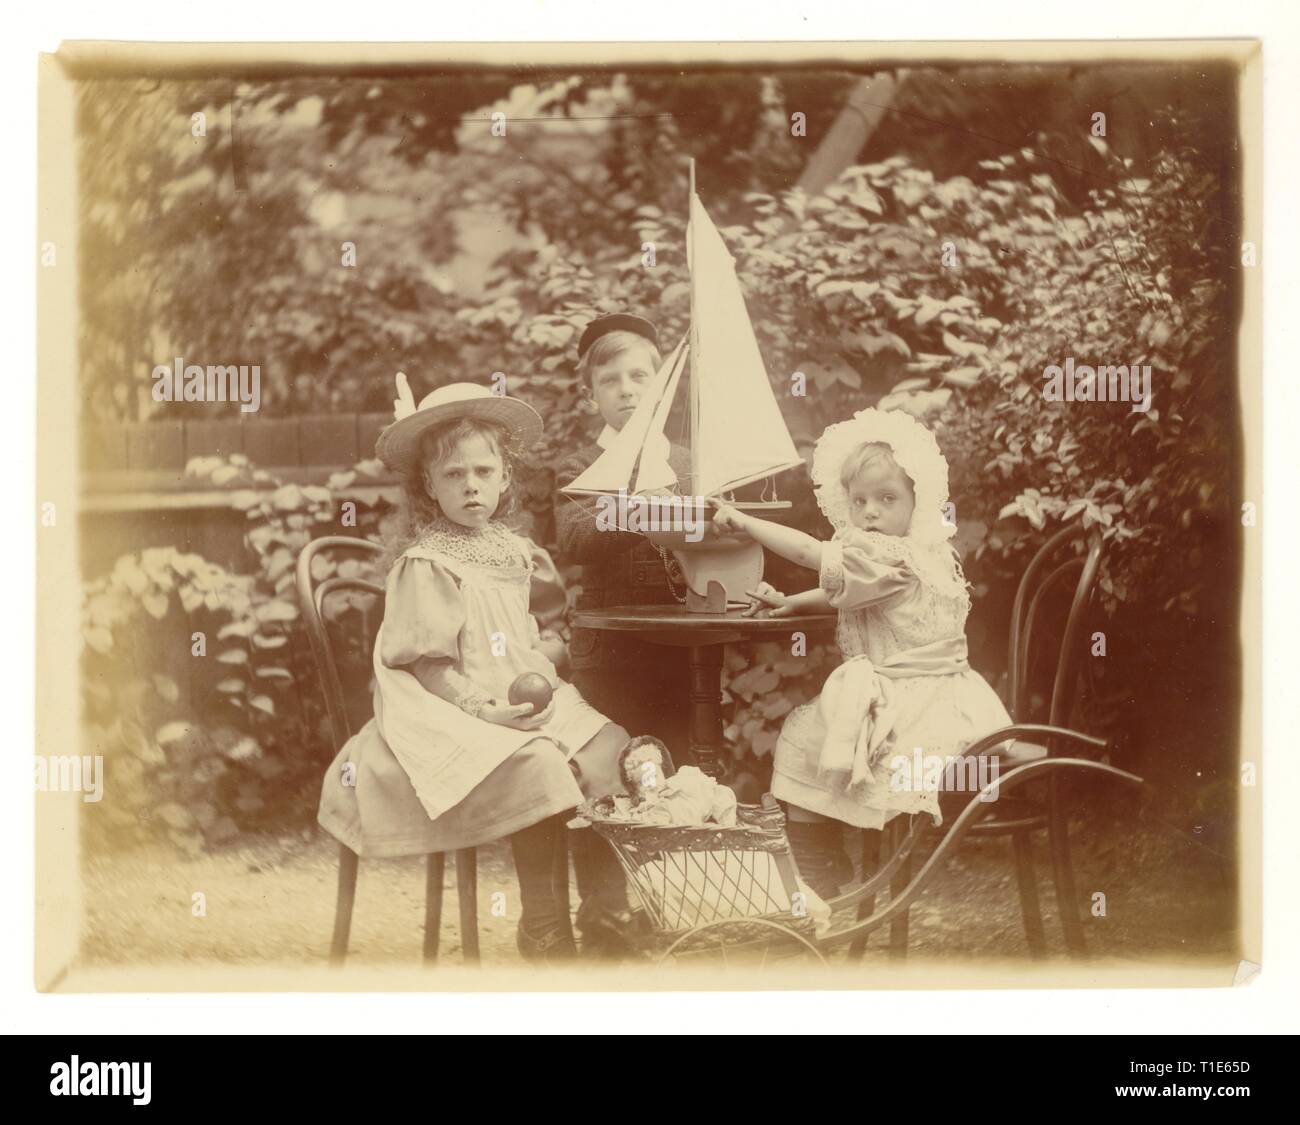 Victorian Photograph of young children in garden wearing hats, (the boy has a fez style hat on) playing with toy yacht and a fashionably dressed doll in a pram, U.K. circa 1894 Stock Photo